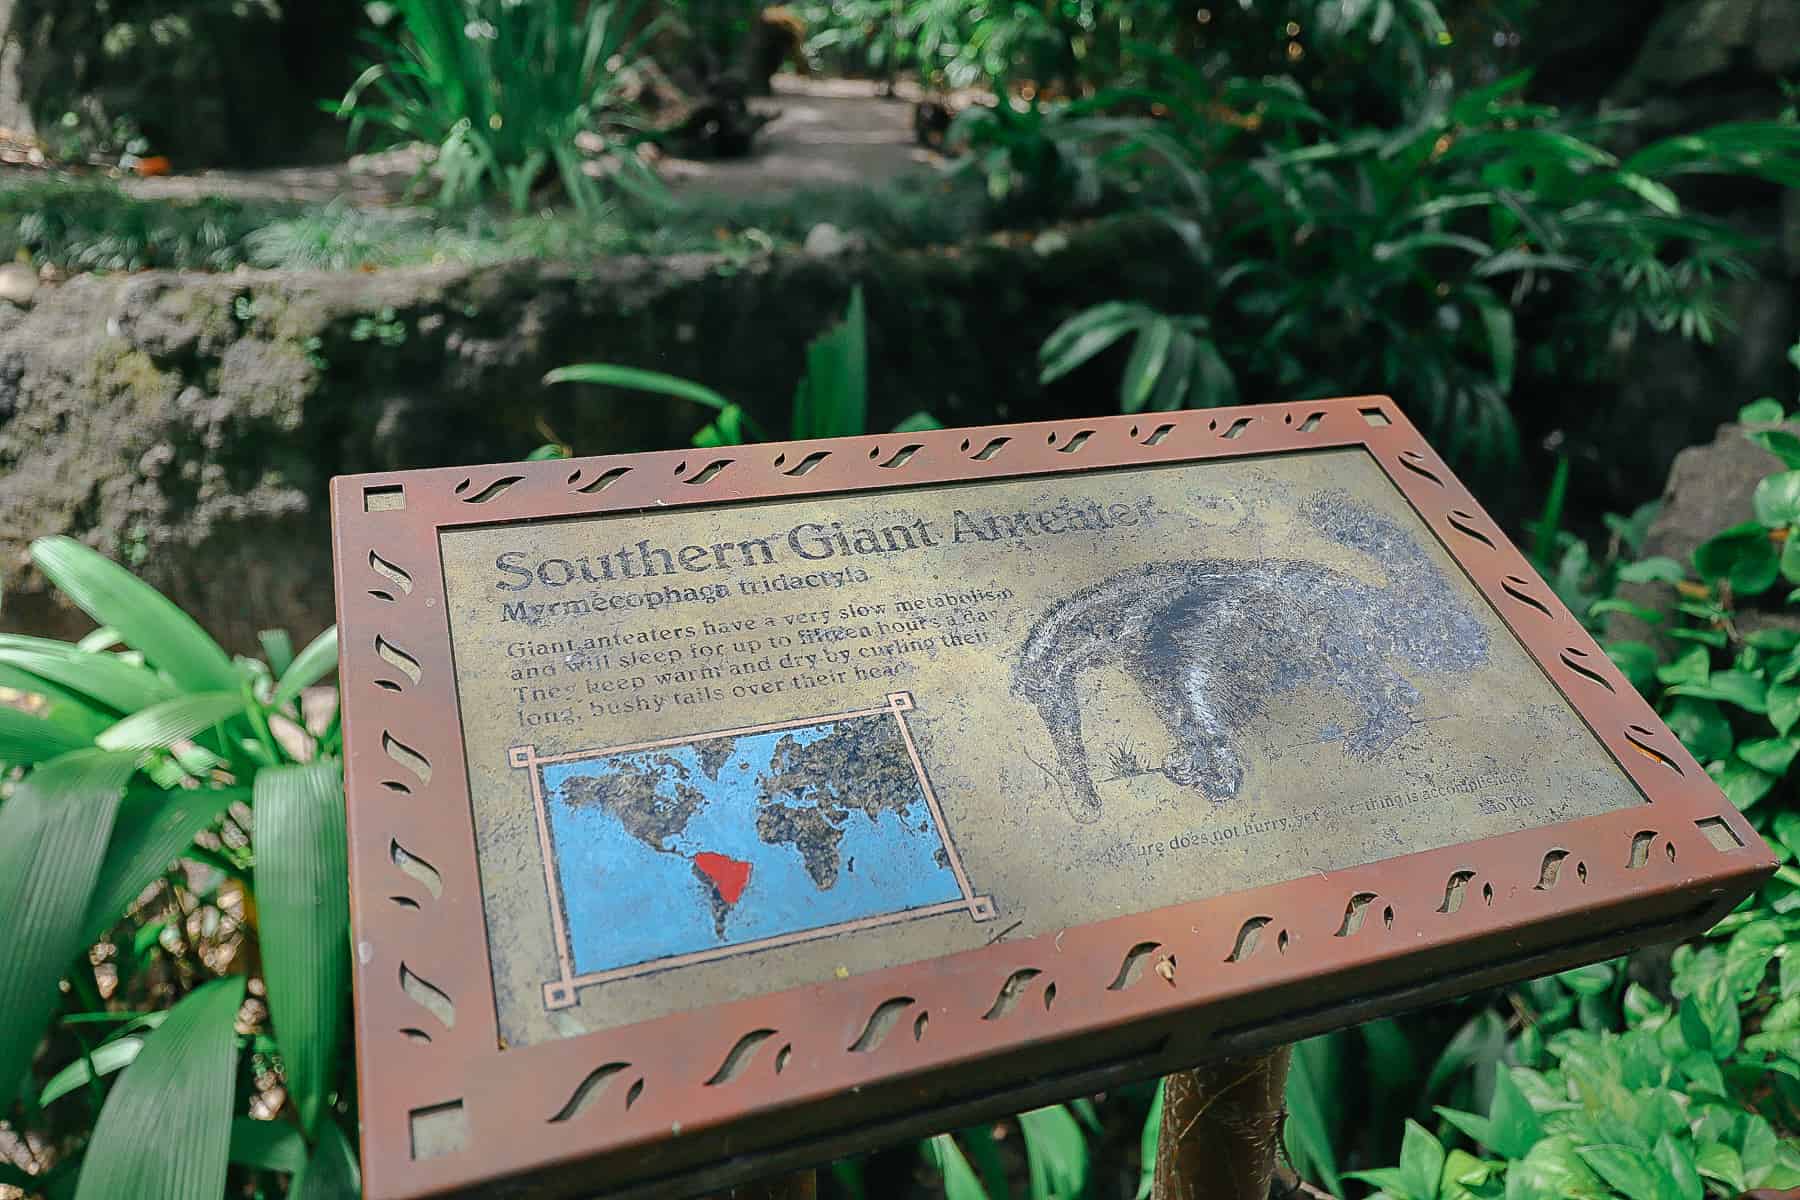 signage for the Southern Giant Anteater 